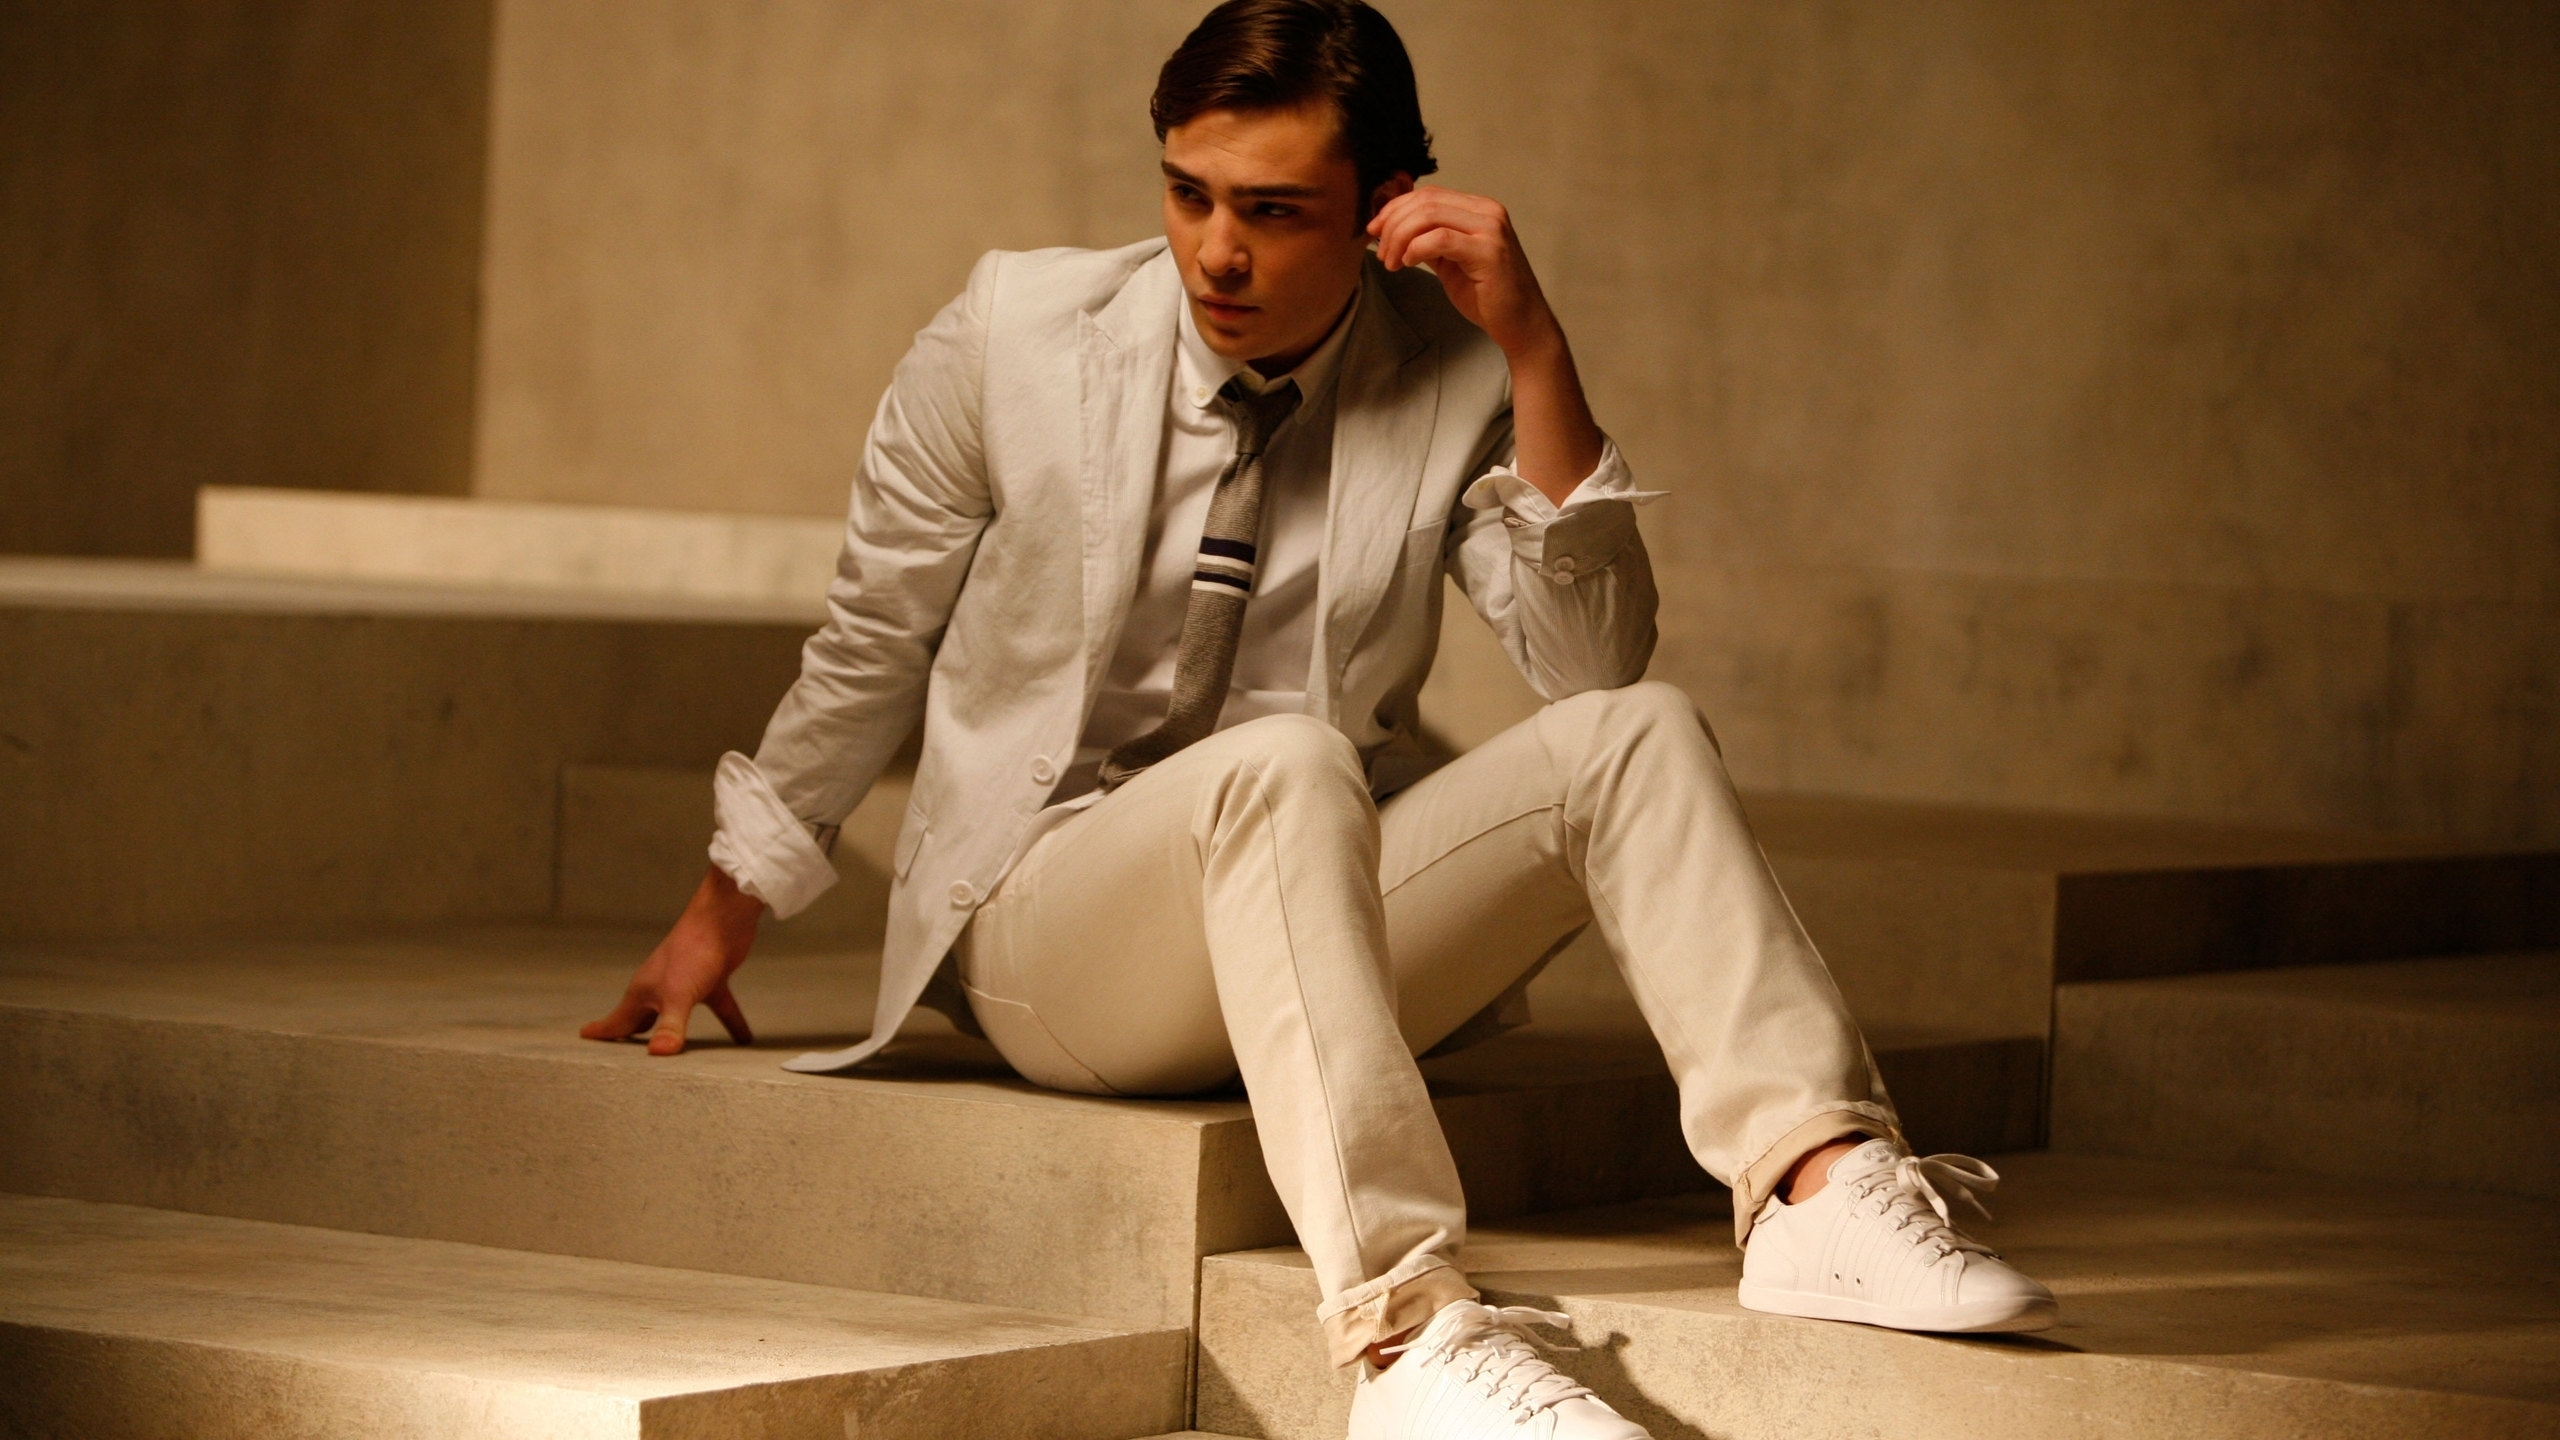 Ed Westwick Pure for 2560x1440 HDTV resolution